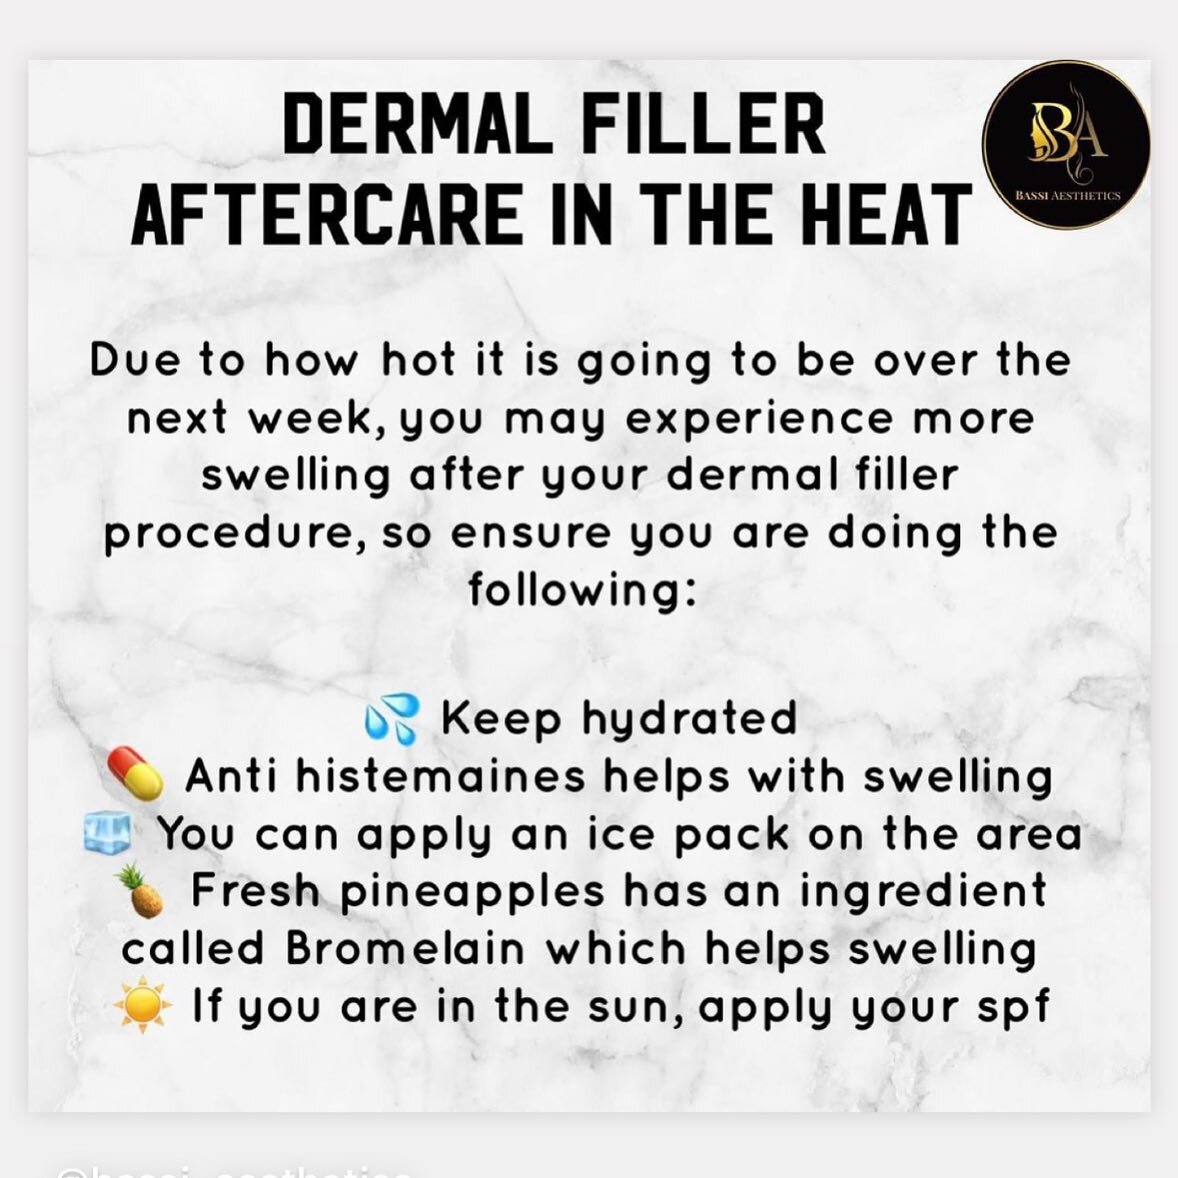 Dermal filler aftercare in the heat 
.
.
.
.
#dermalfillers #heat #aftercare #beauty #injectables